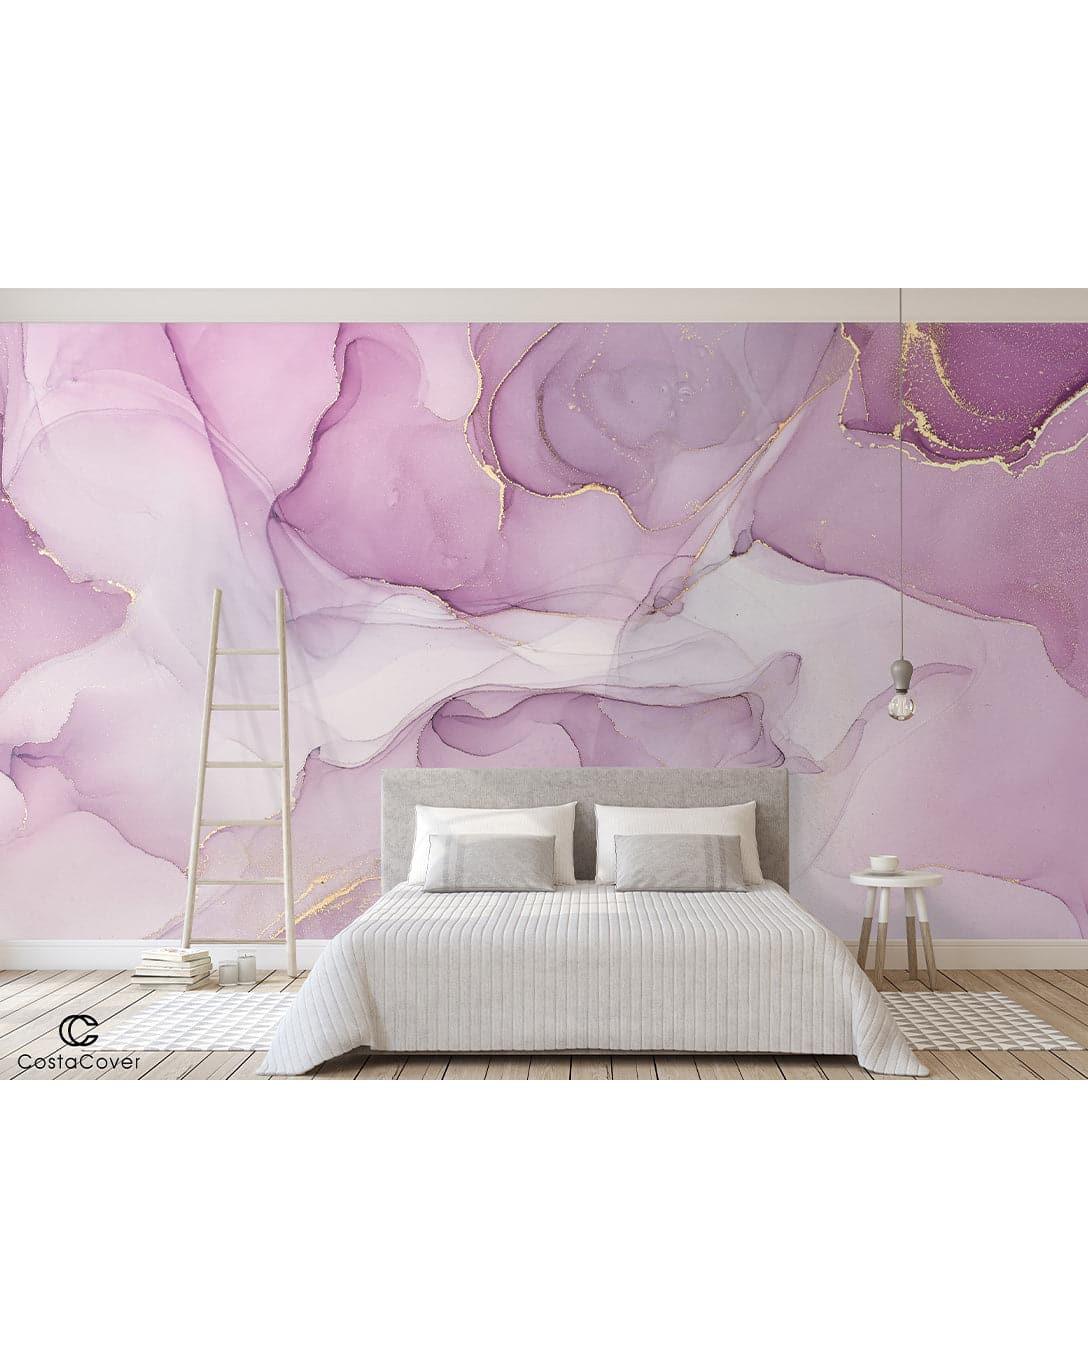 Watercolor Abstract Purple Marble Alcohol Ink Mural Watercolor Abstract Purple Marble Alcohol Ink Mural Watercolor Marble Abstract Alcohol Ink Pink White Paint Wall Mural 